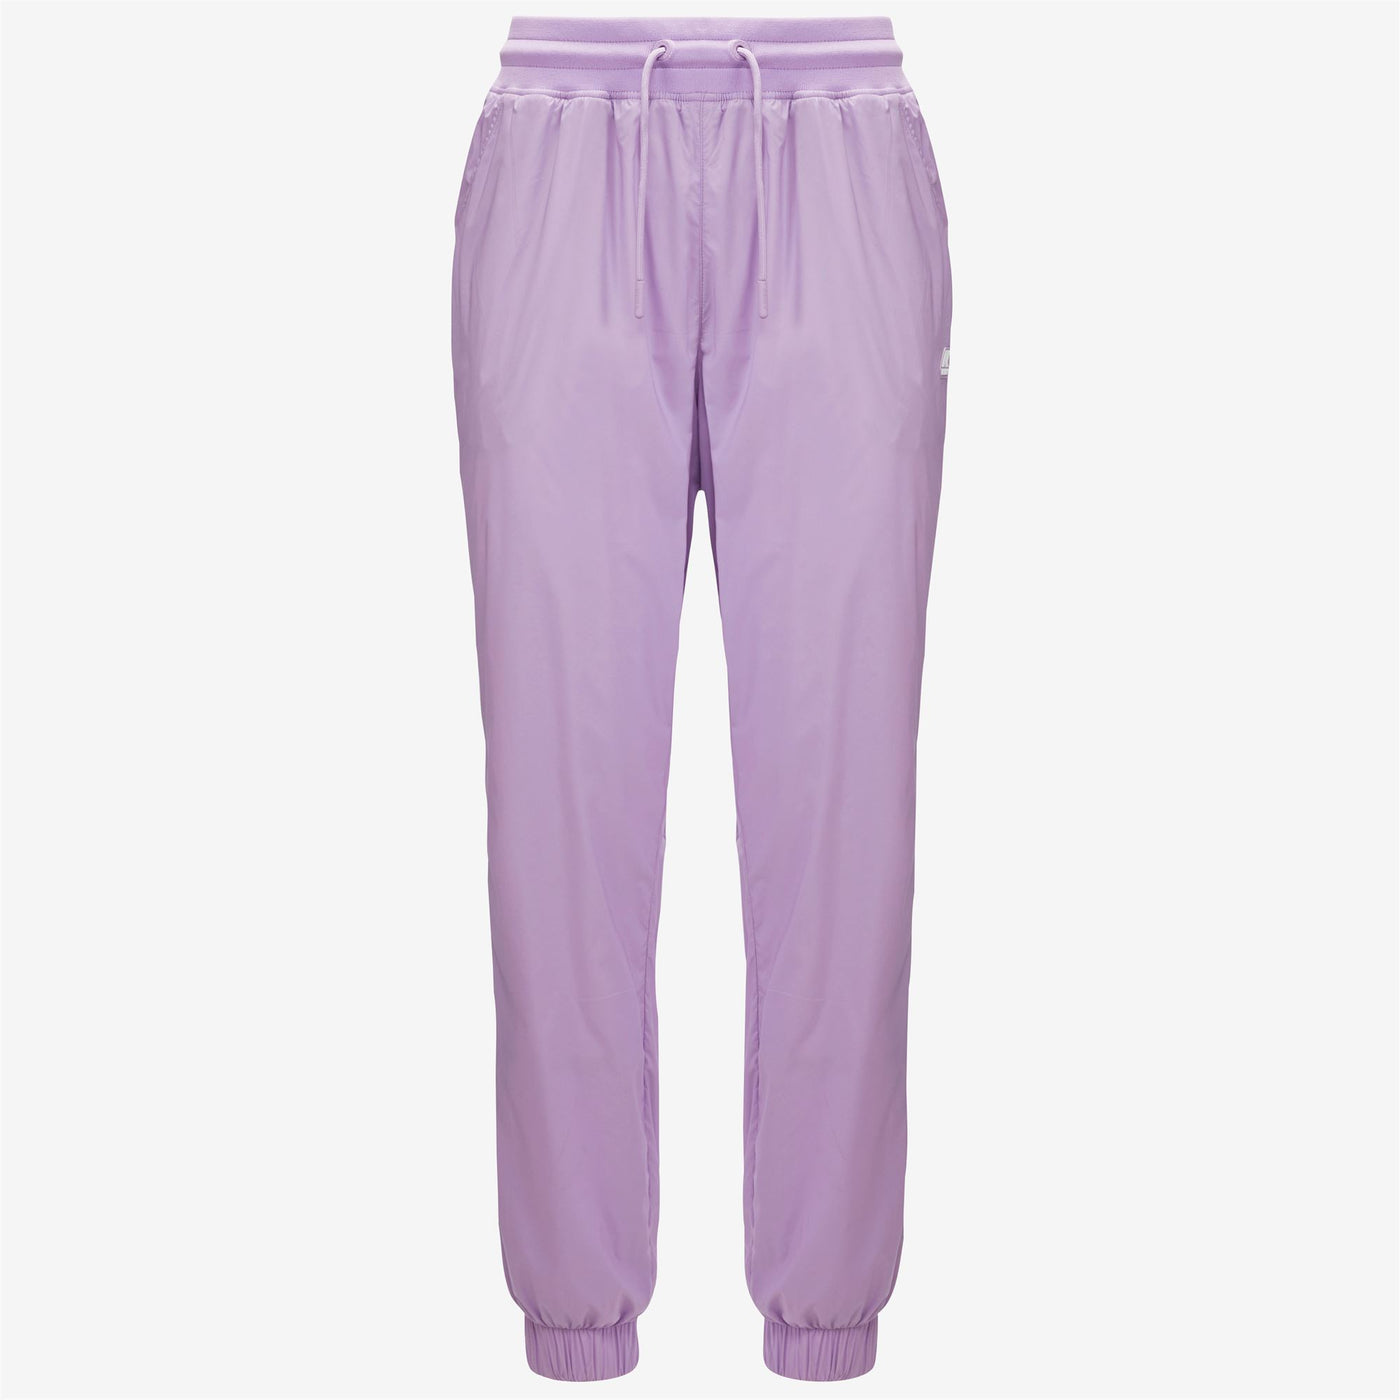 Pants Woman MELLY NY STRETCH Sport Trousers VIOLET PEONIA | kway Photo (jpg Rgb)			